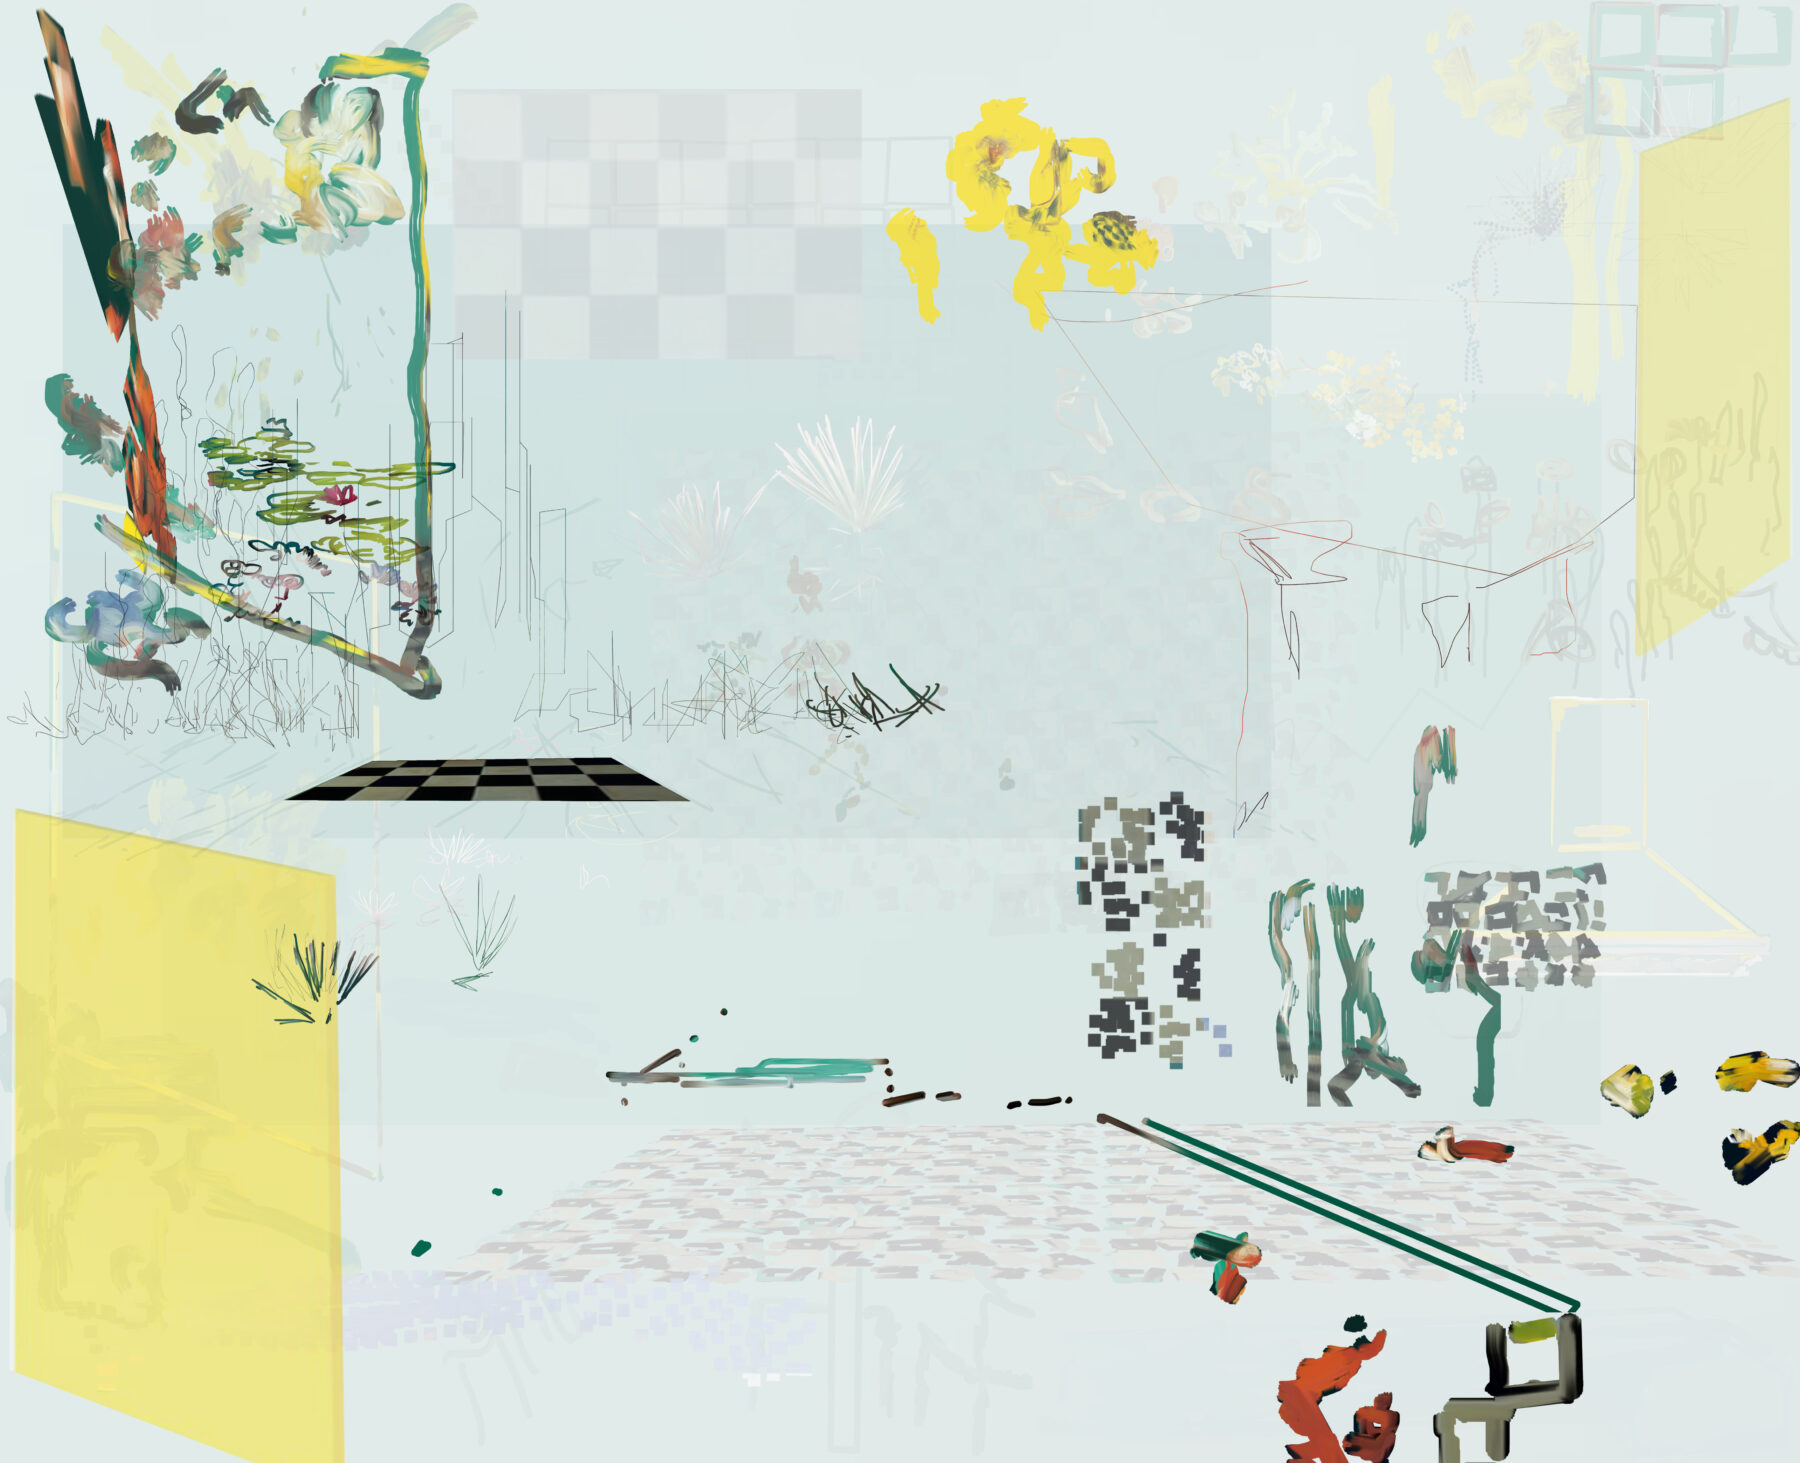 PETRA CORTRIGHT, Room, 2021. Room 45 47, 45 Layer PNG image. Courtesy the artist and Simco Drops.